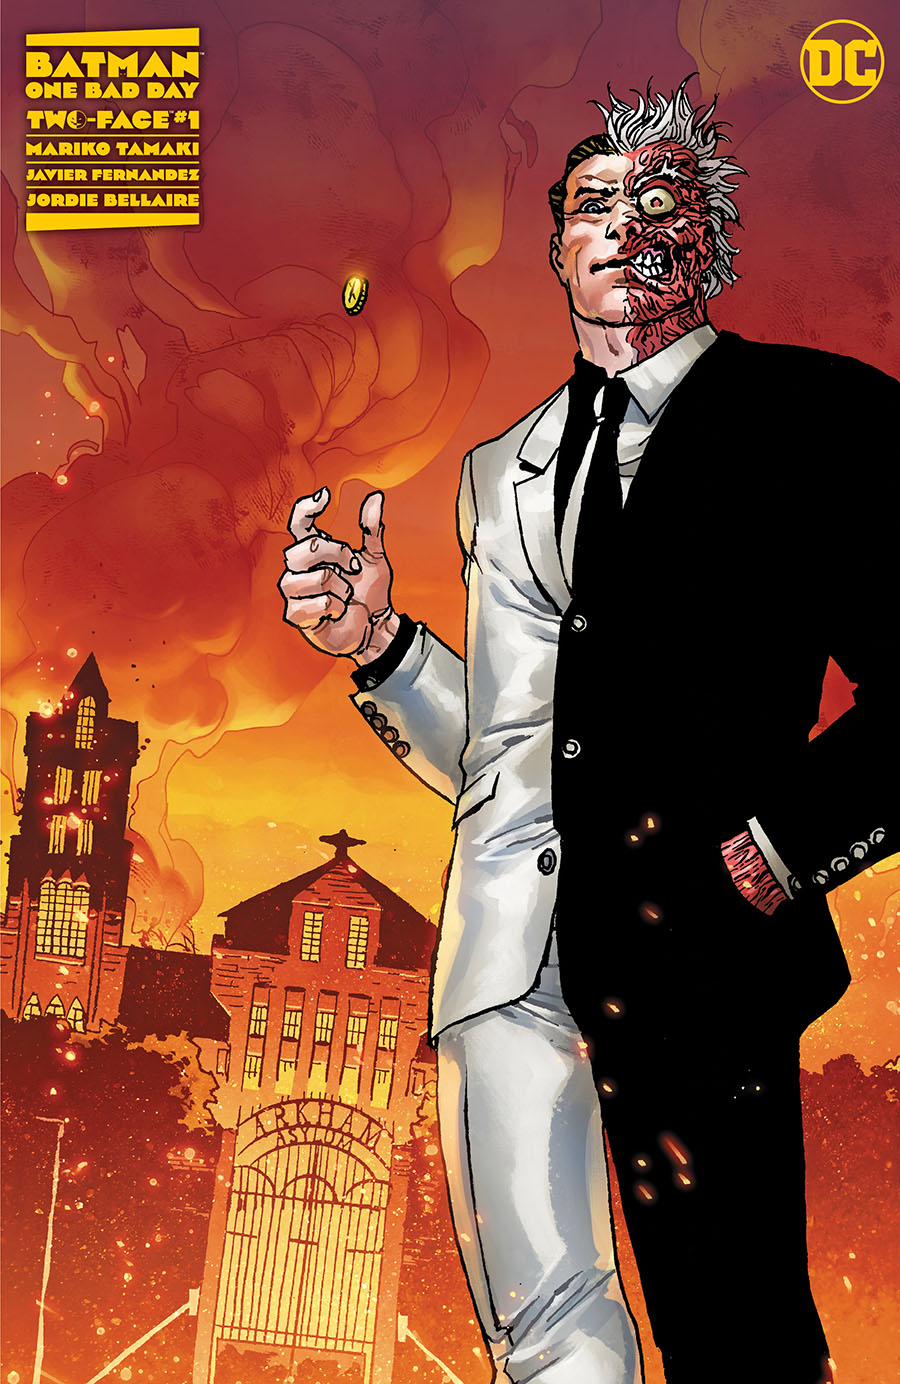 Batman One Bad Day Two-Face #1 (One Shot) Cover C Variant Giuseppe Camuncoli Premium Cover